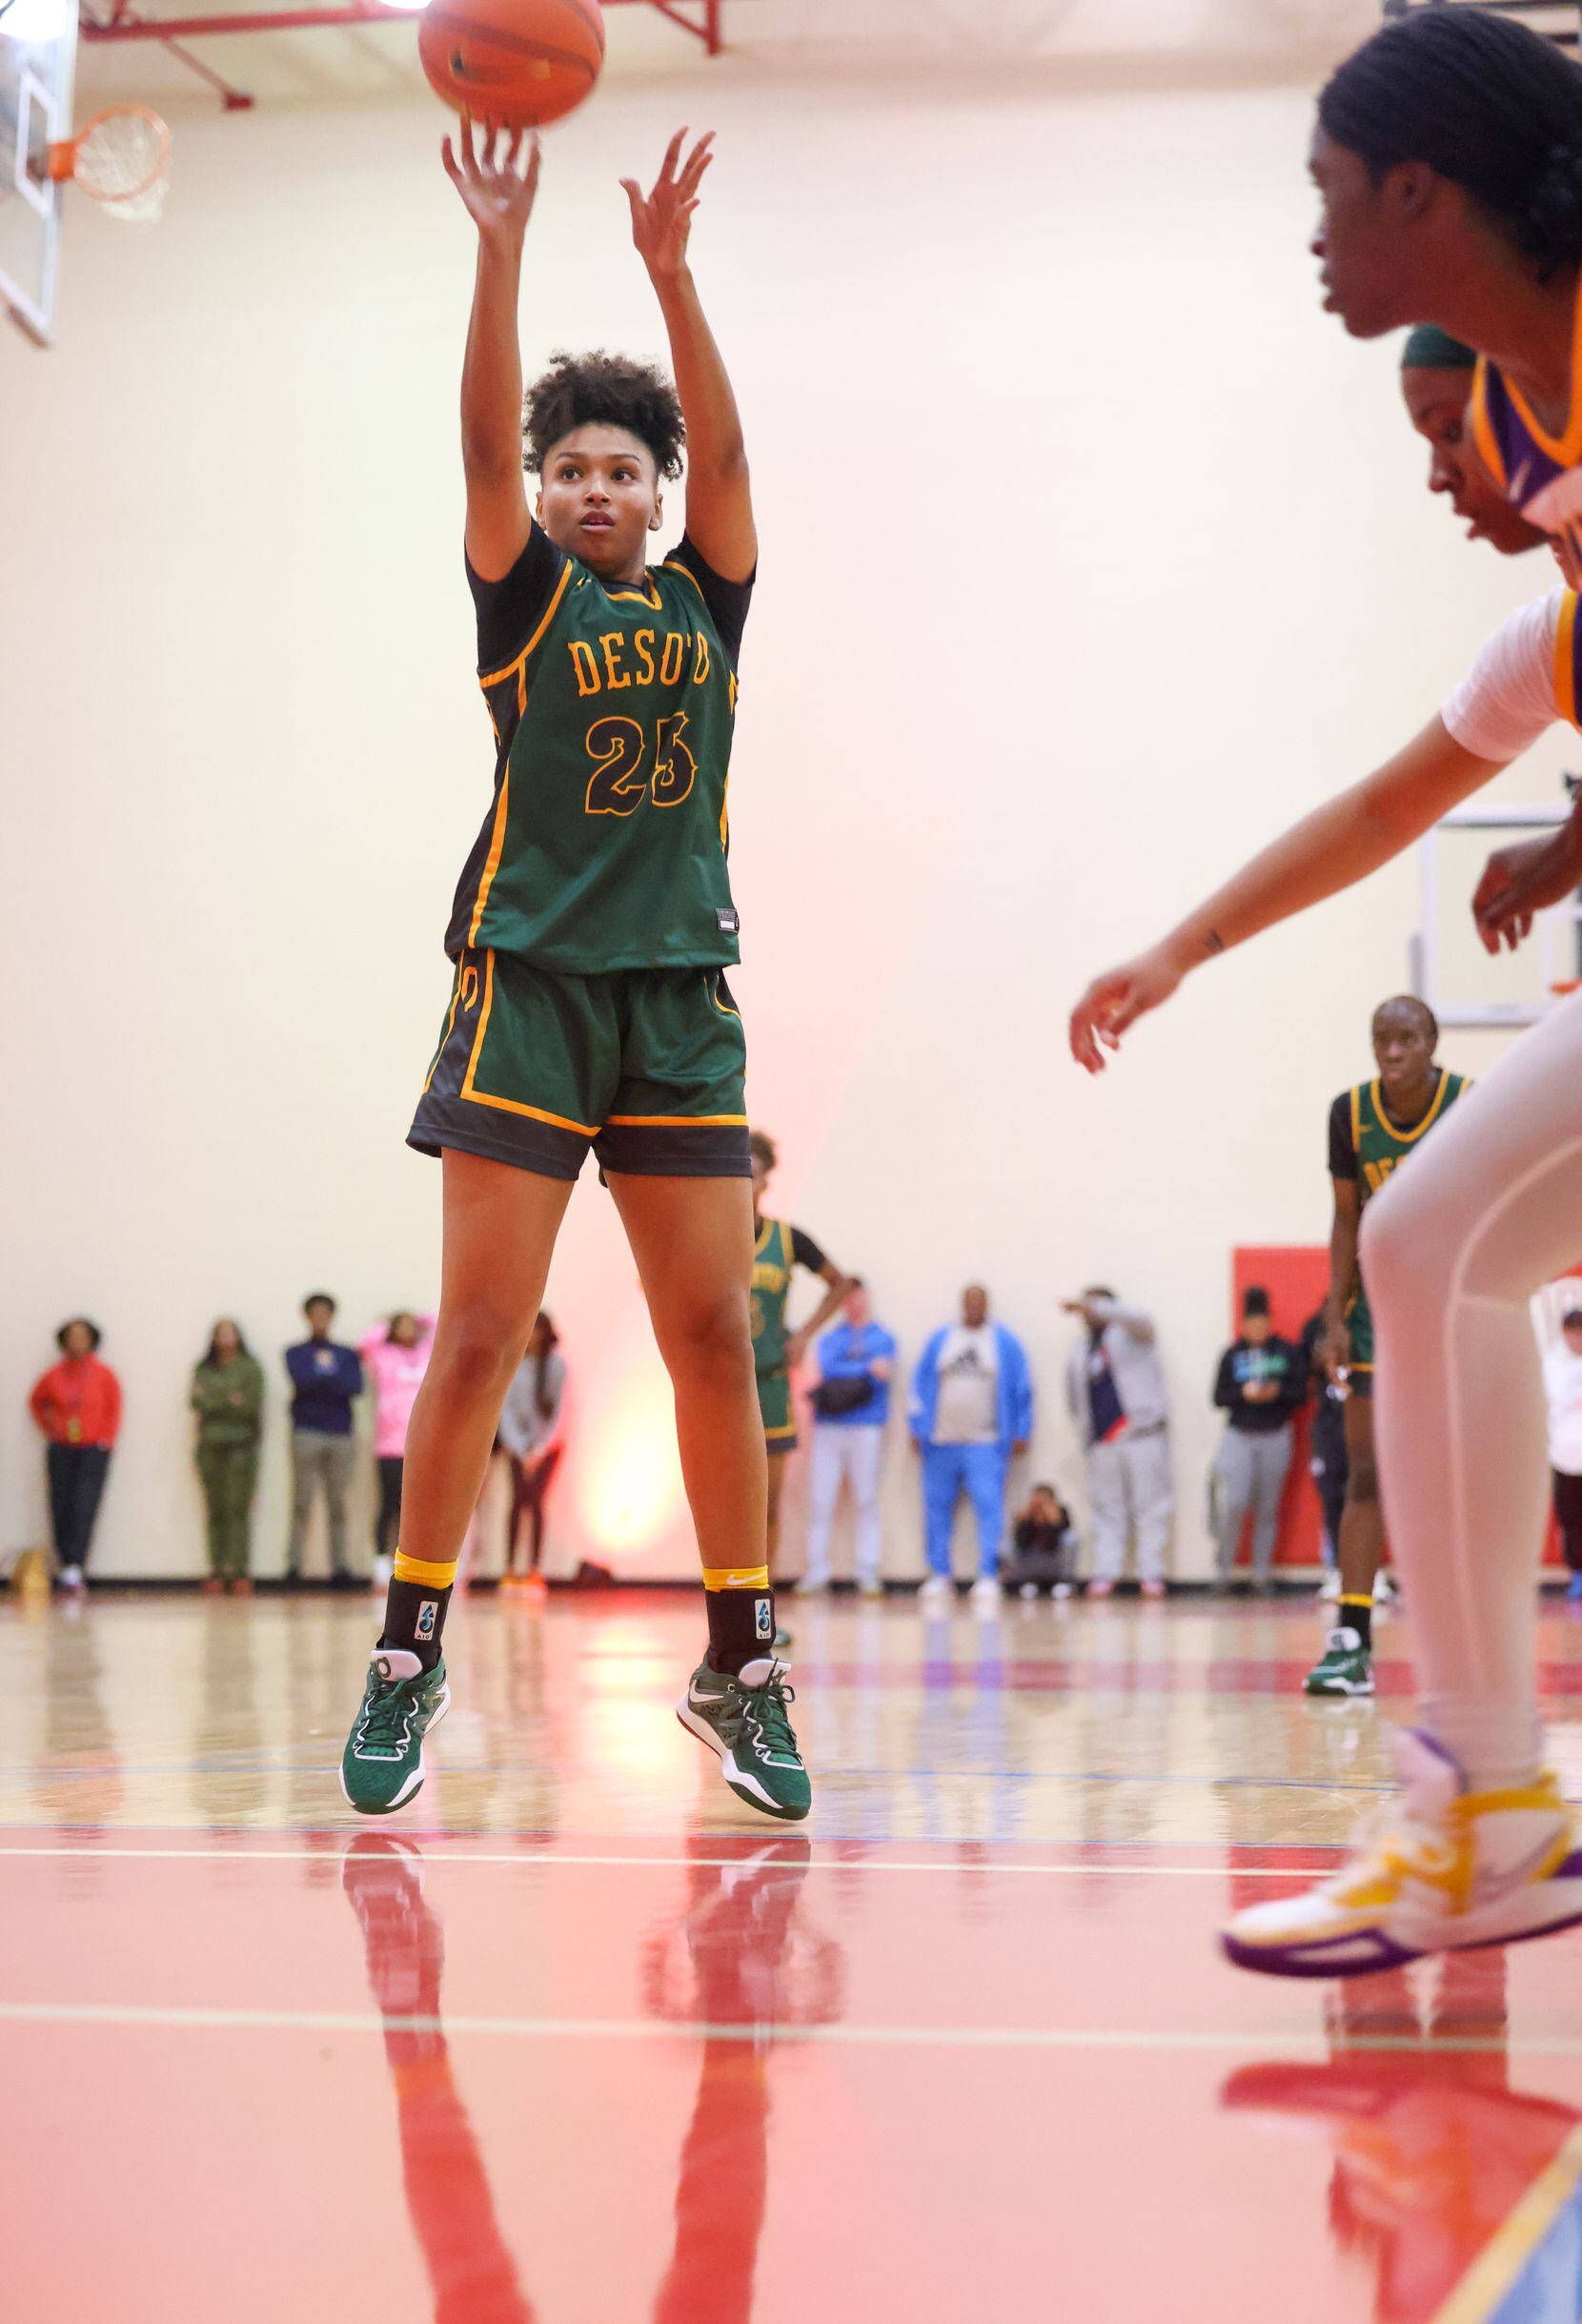 DeSoto shooting guard Amayah Garcia (25) makes a free throw in the second half of a game...